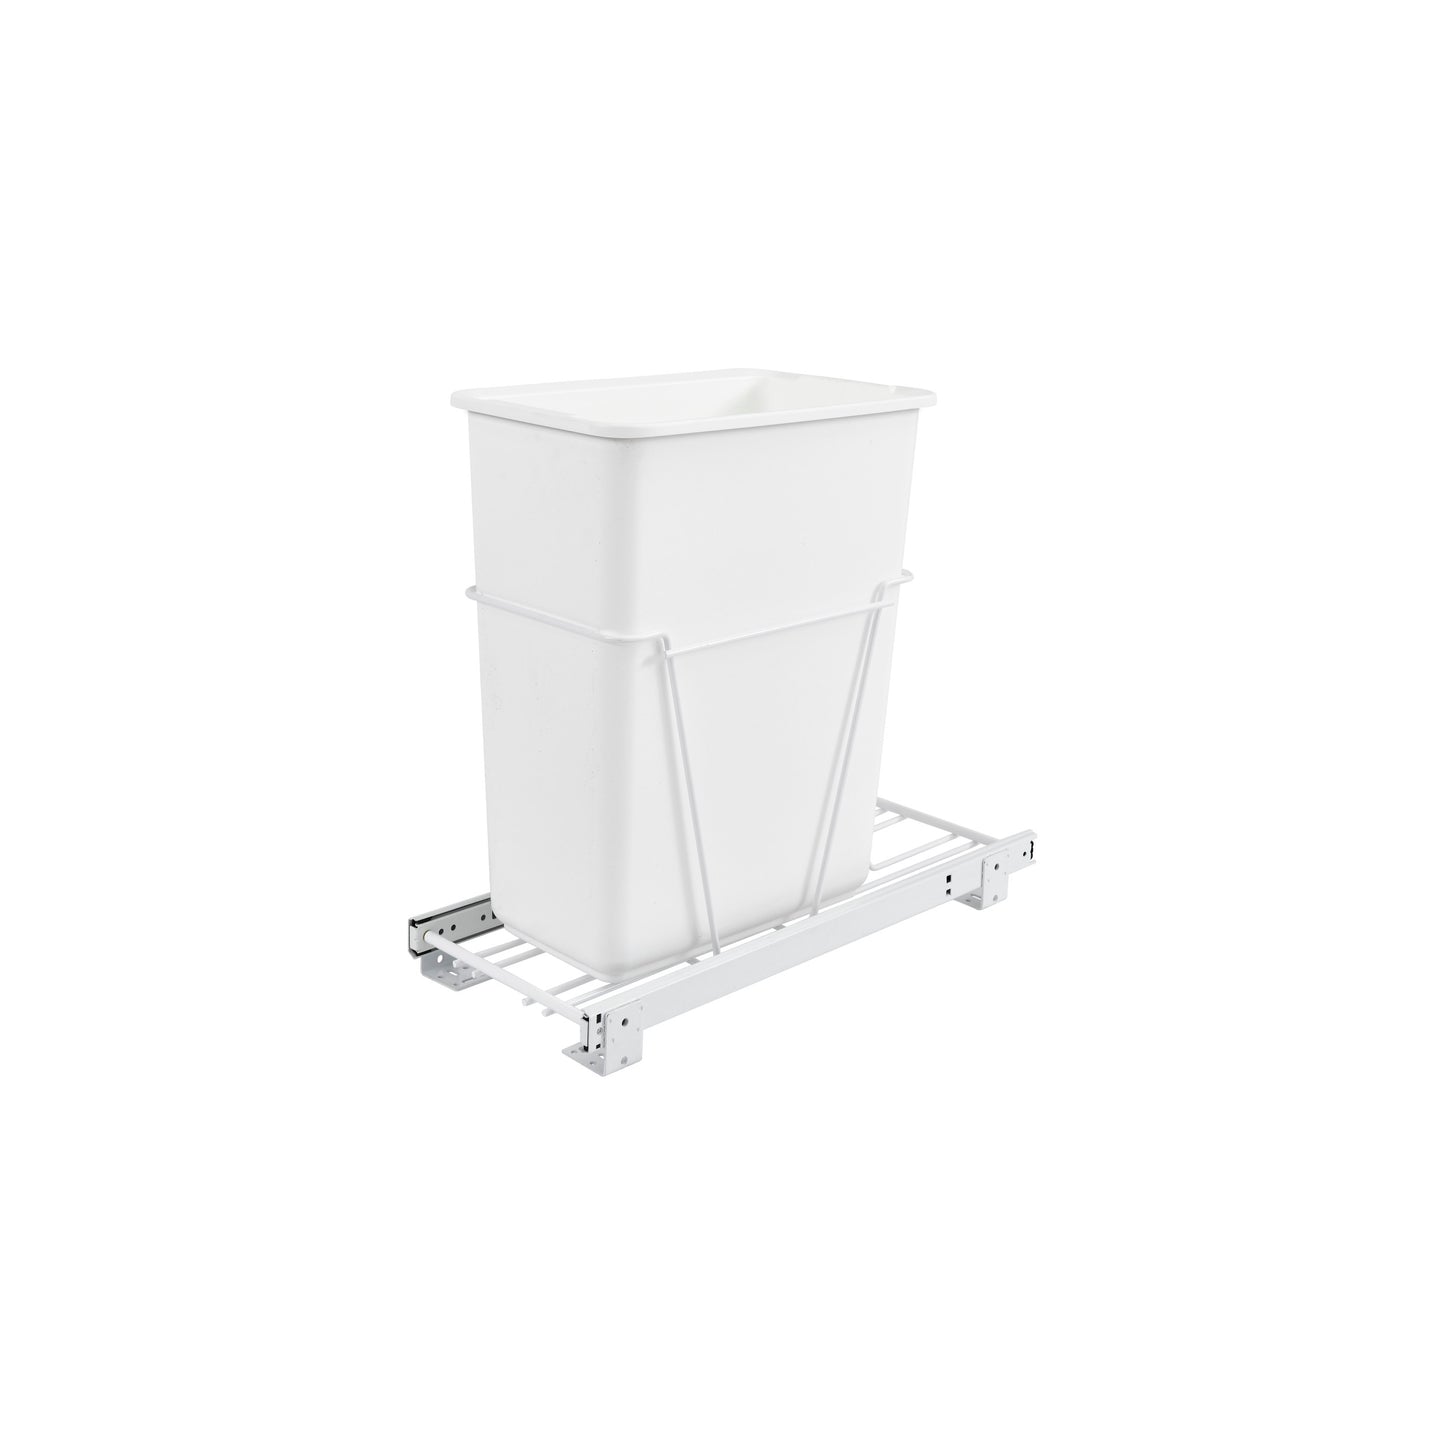 Rev-A-Shelf / RV-9PB / White Steel Pullout Waste/Trash Container